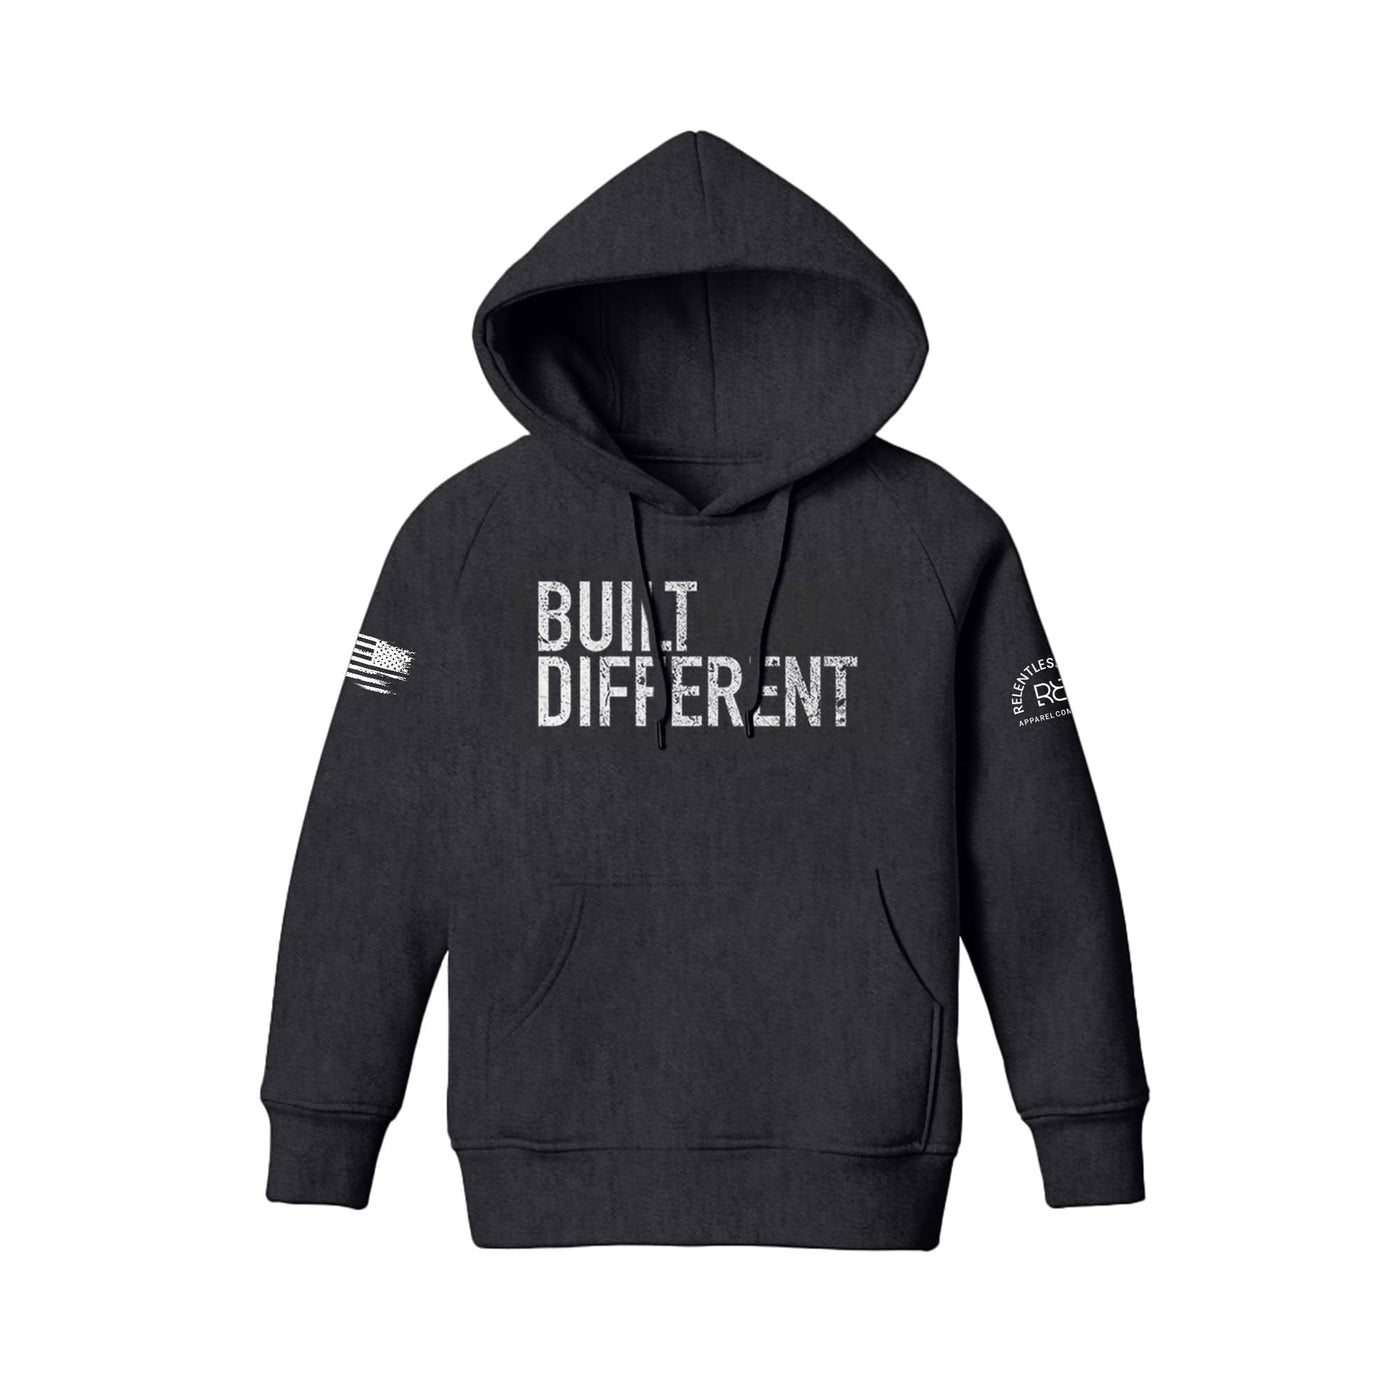 Built Different Youth front design charcoal heather hoodie